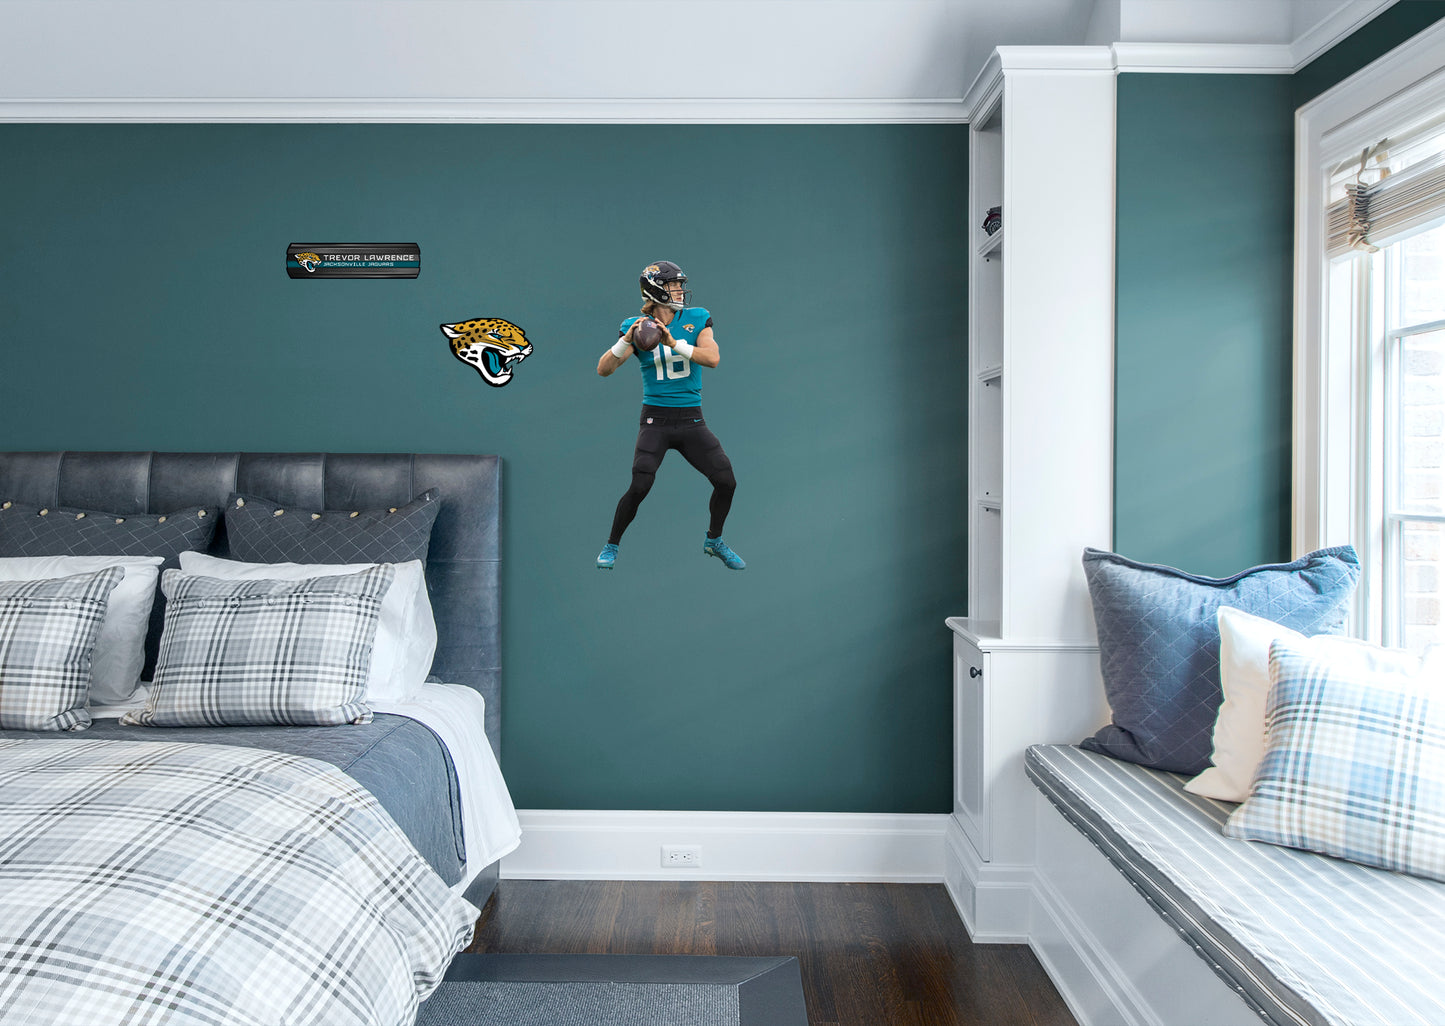 Jacksonville Jaguars: Trevor Lawrence         - Officially Licensed NFL Removable Wall   Adhesive Decal